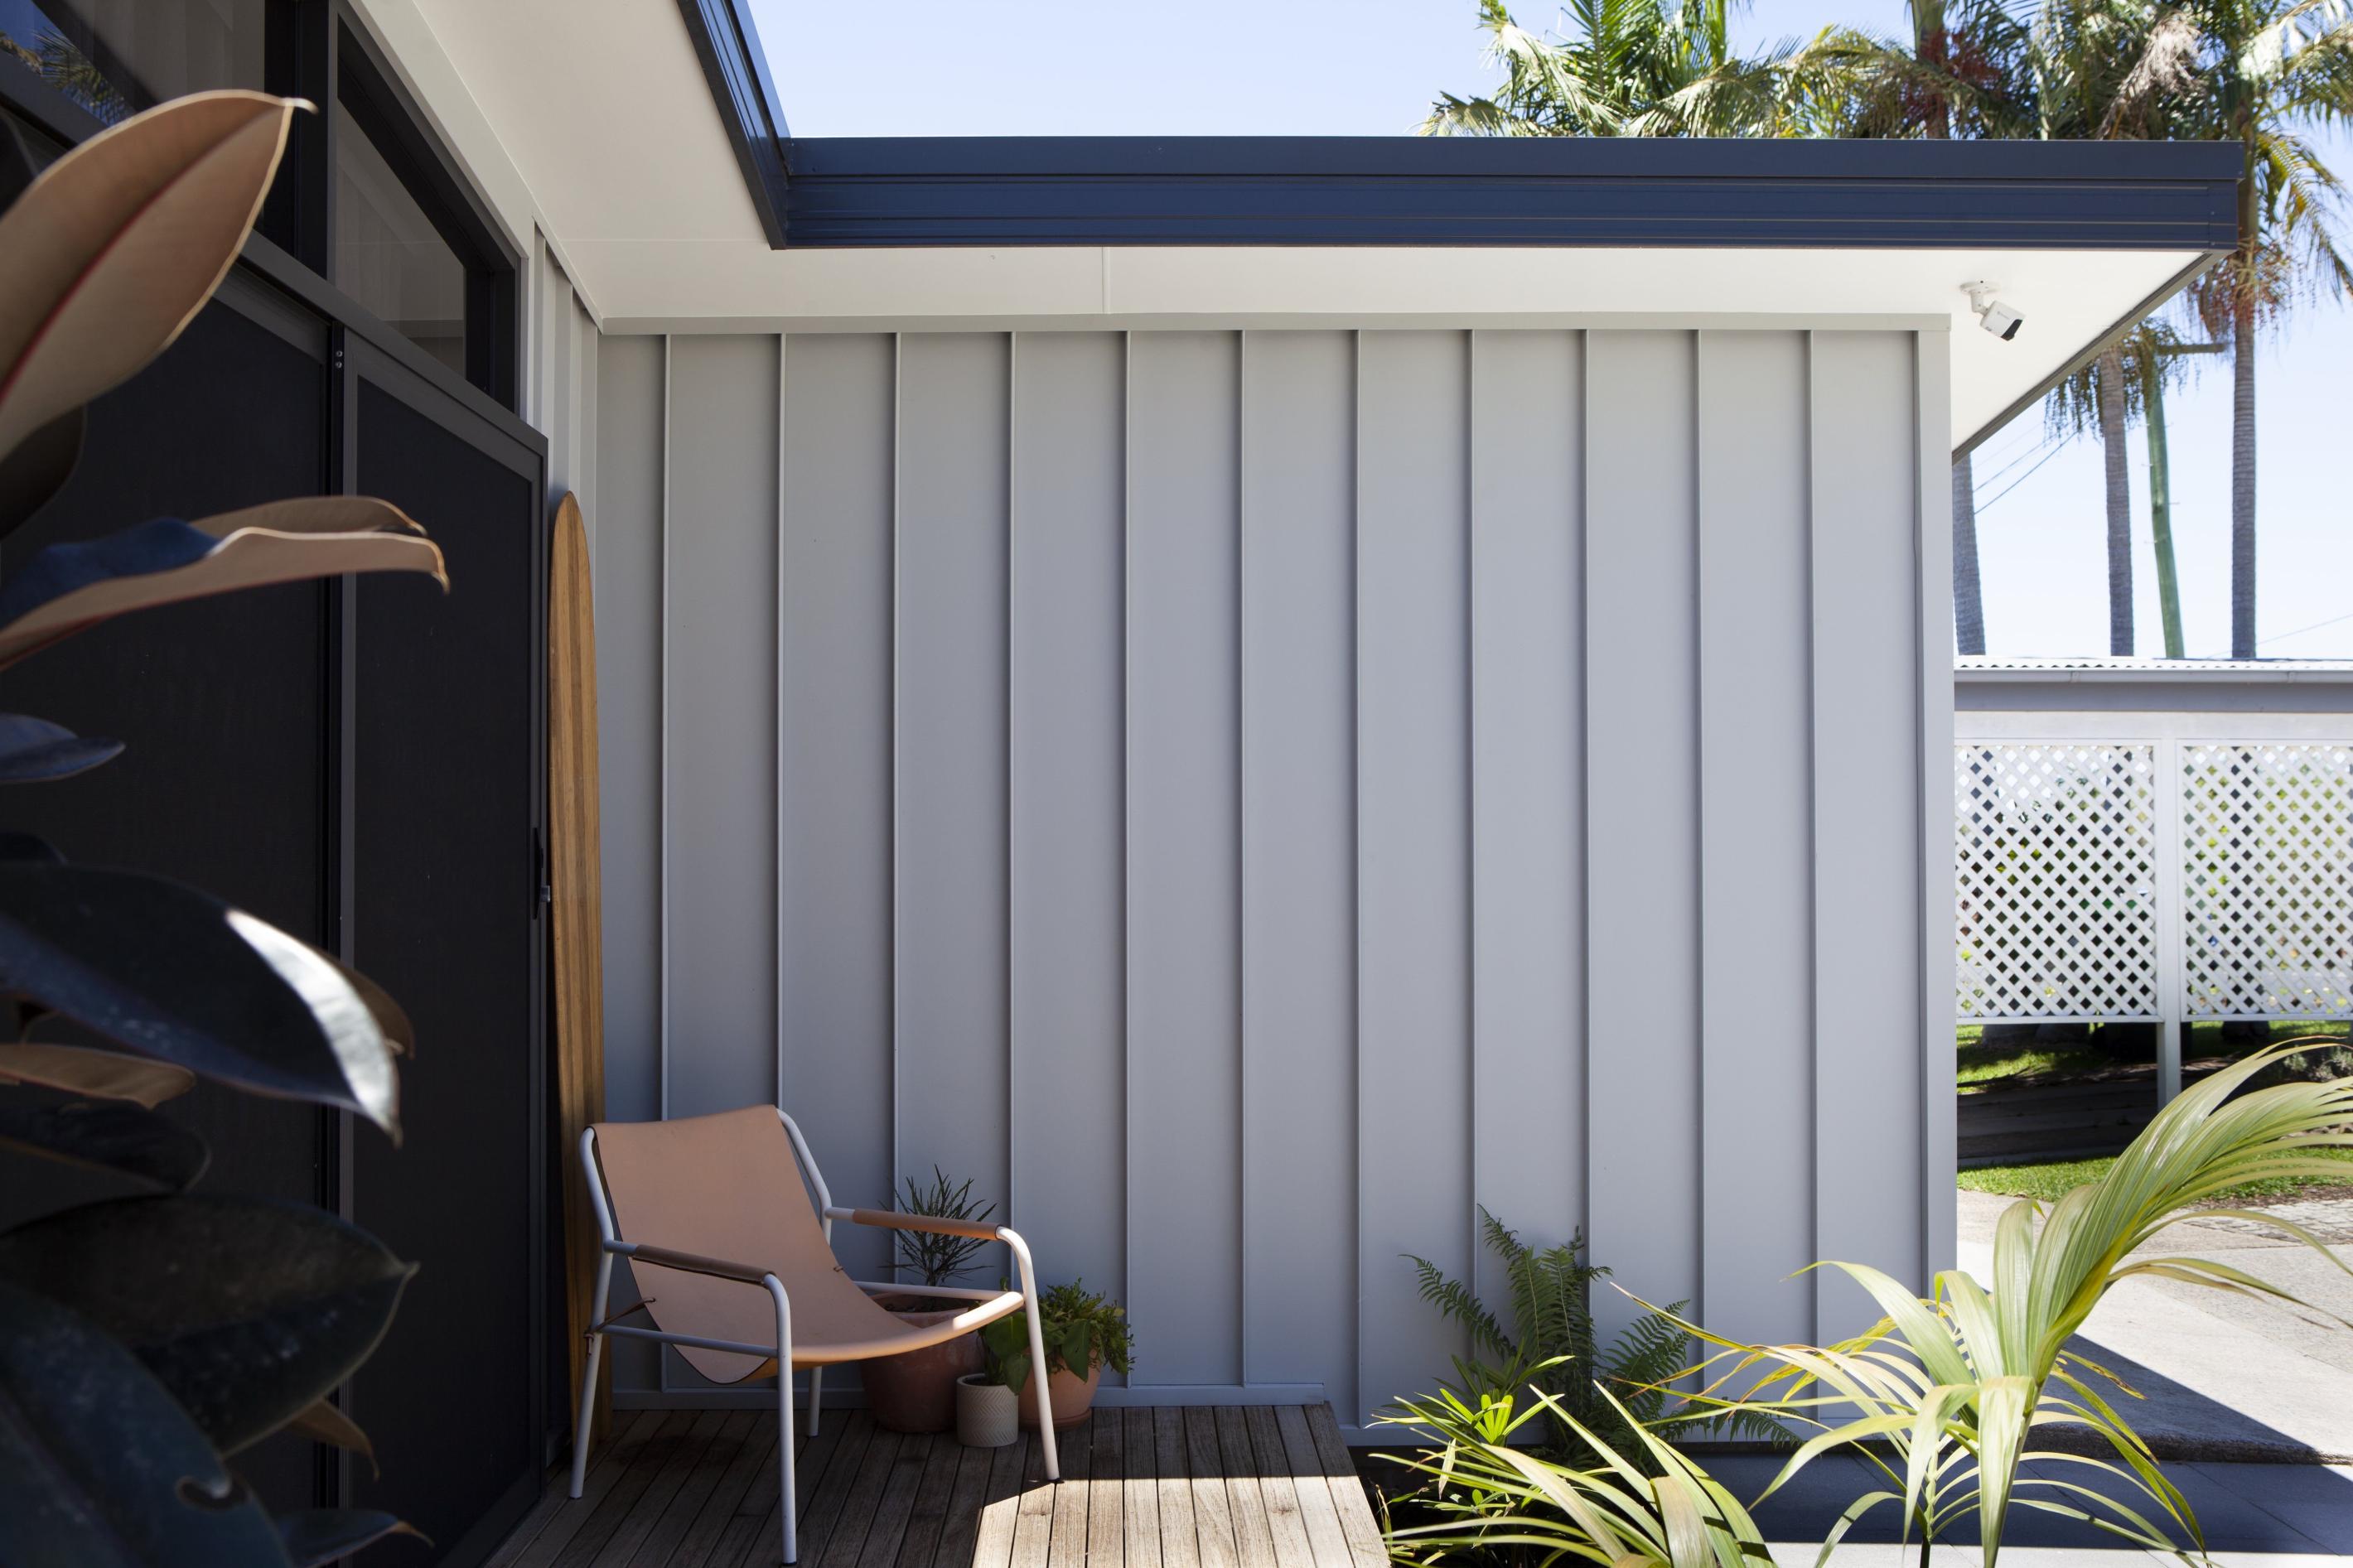 Simon and Ash Vos 'Coffs to Cali' project using COLORBOND® steel colour Shale Grey® in a Matt finish in Lysaght's ENSEAM® profile